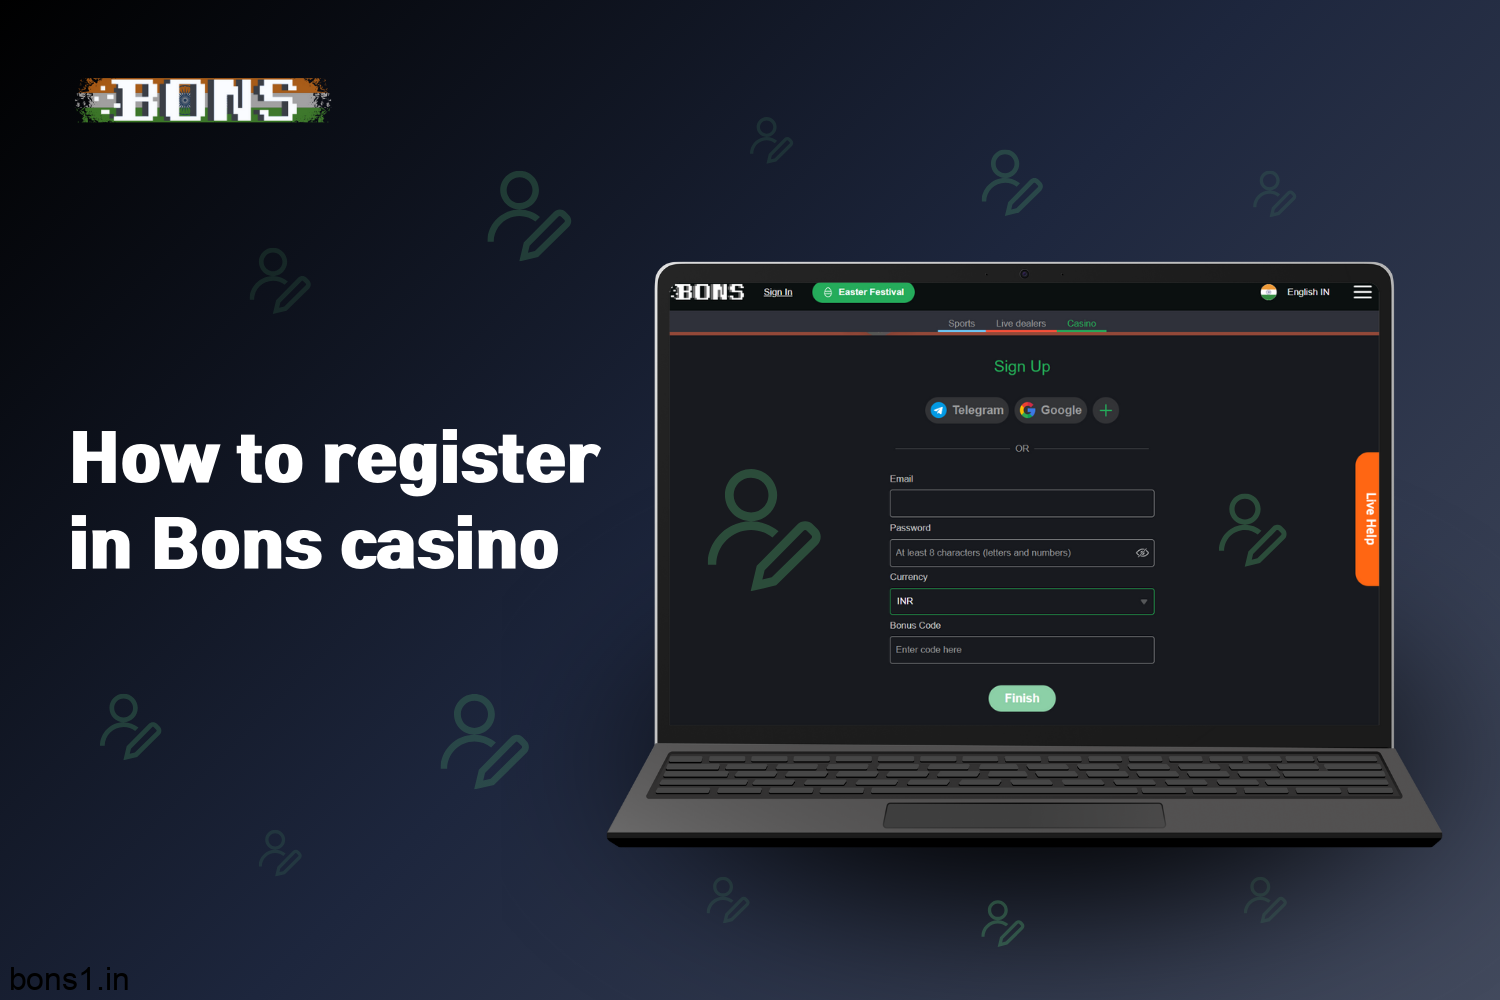 How do users from India register at Casino Bons?